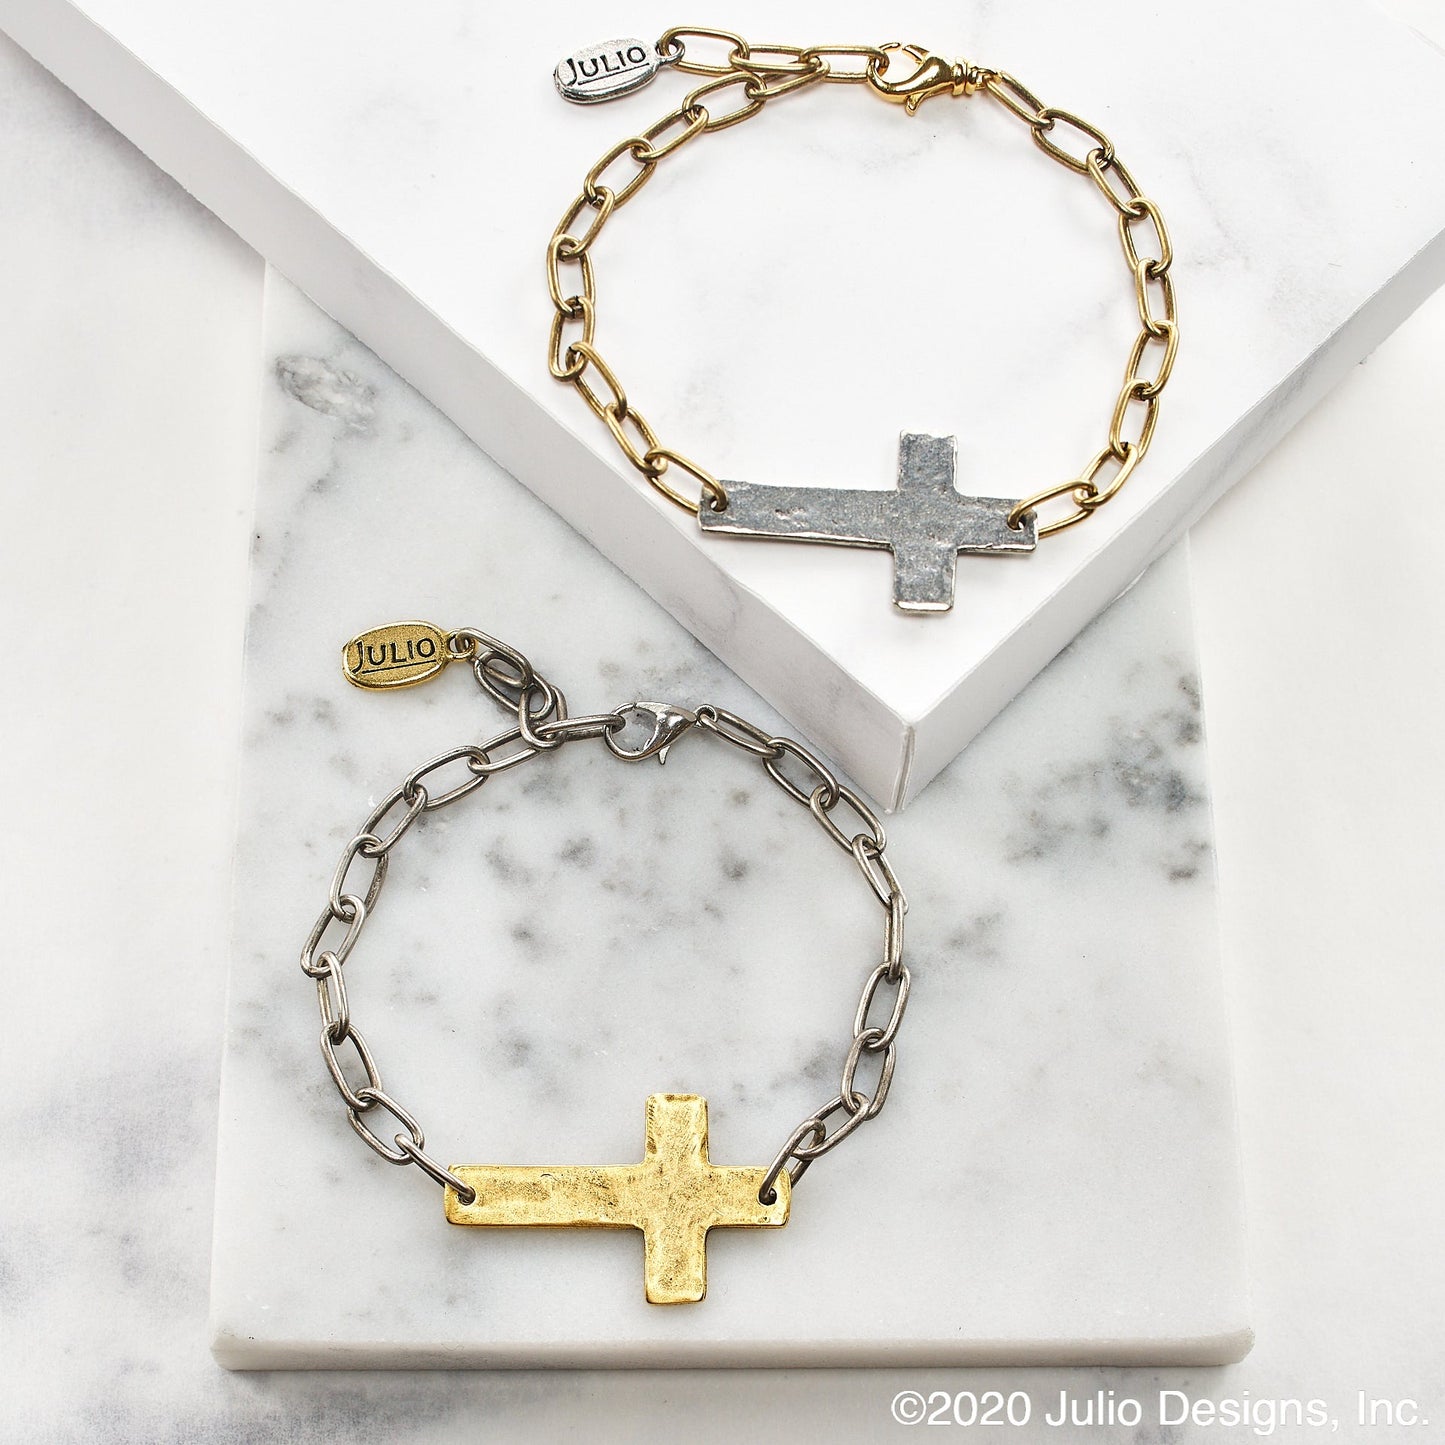 Julio Designs® Cross Chain Bracelet in Gold and Silver